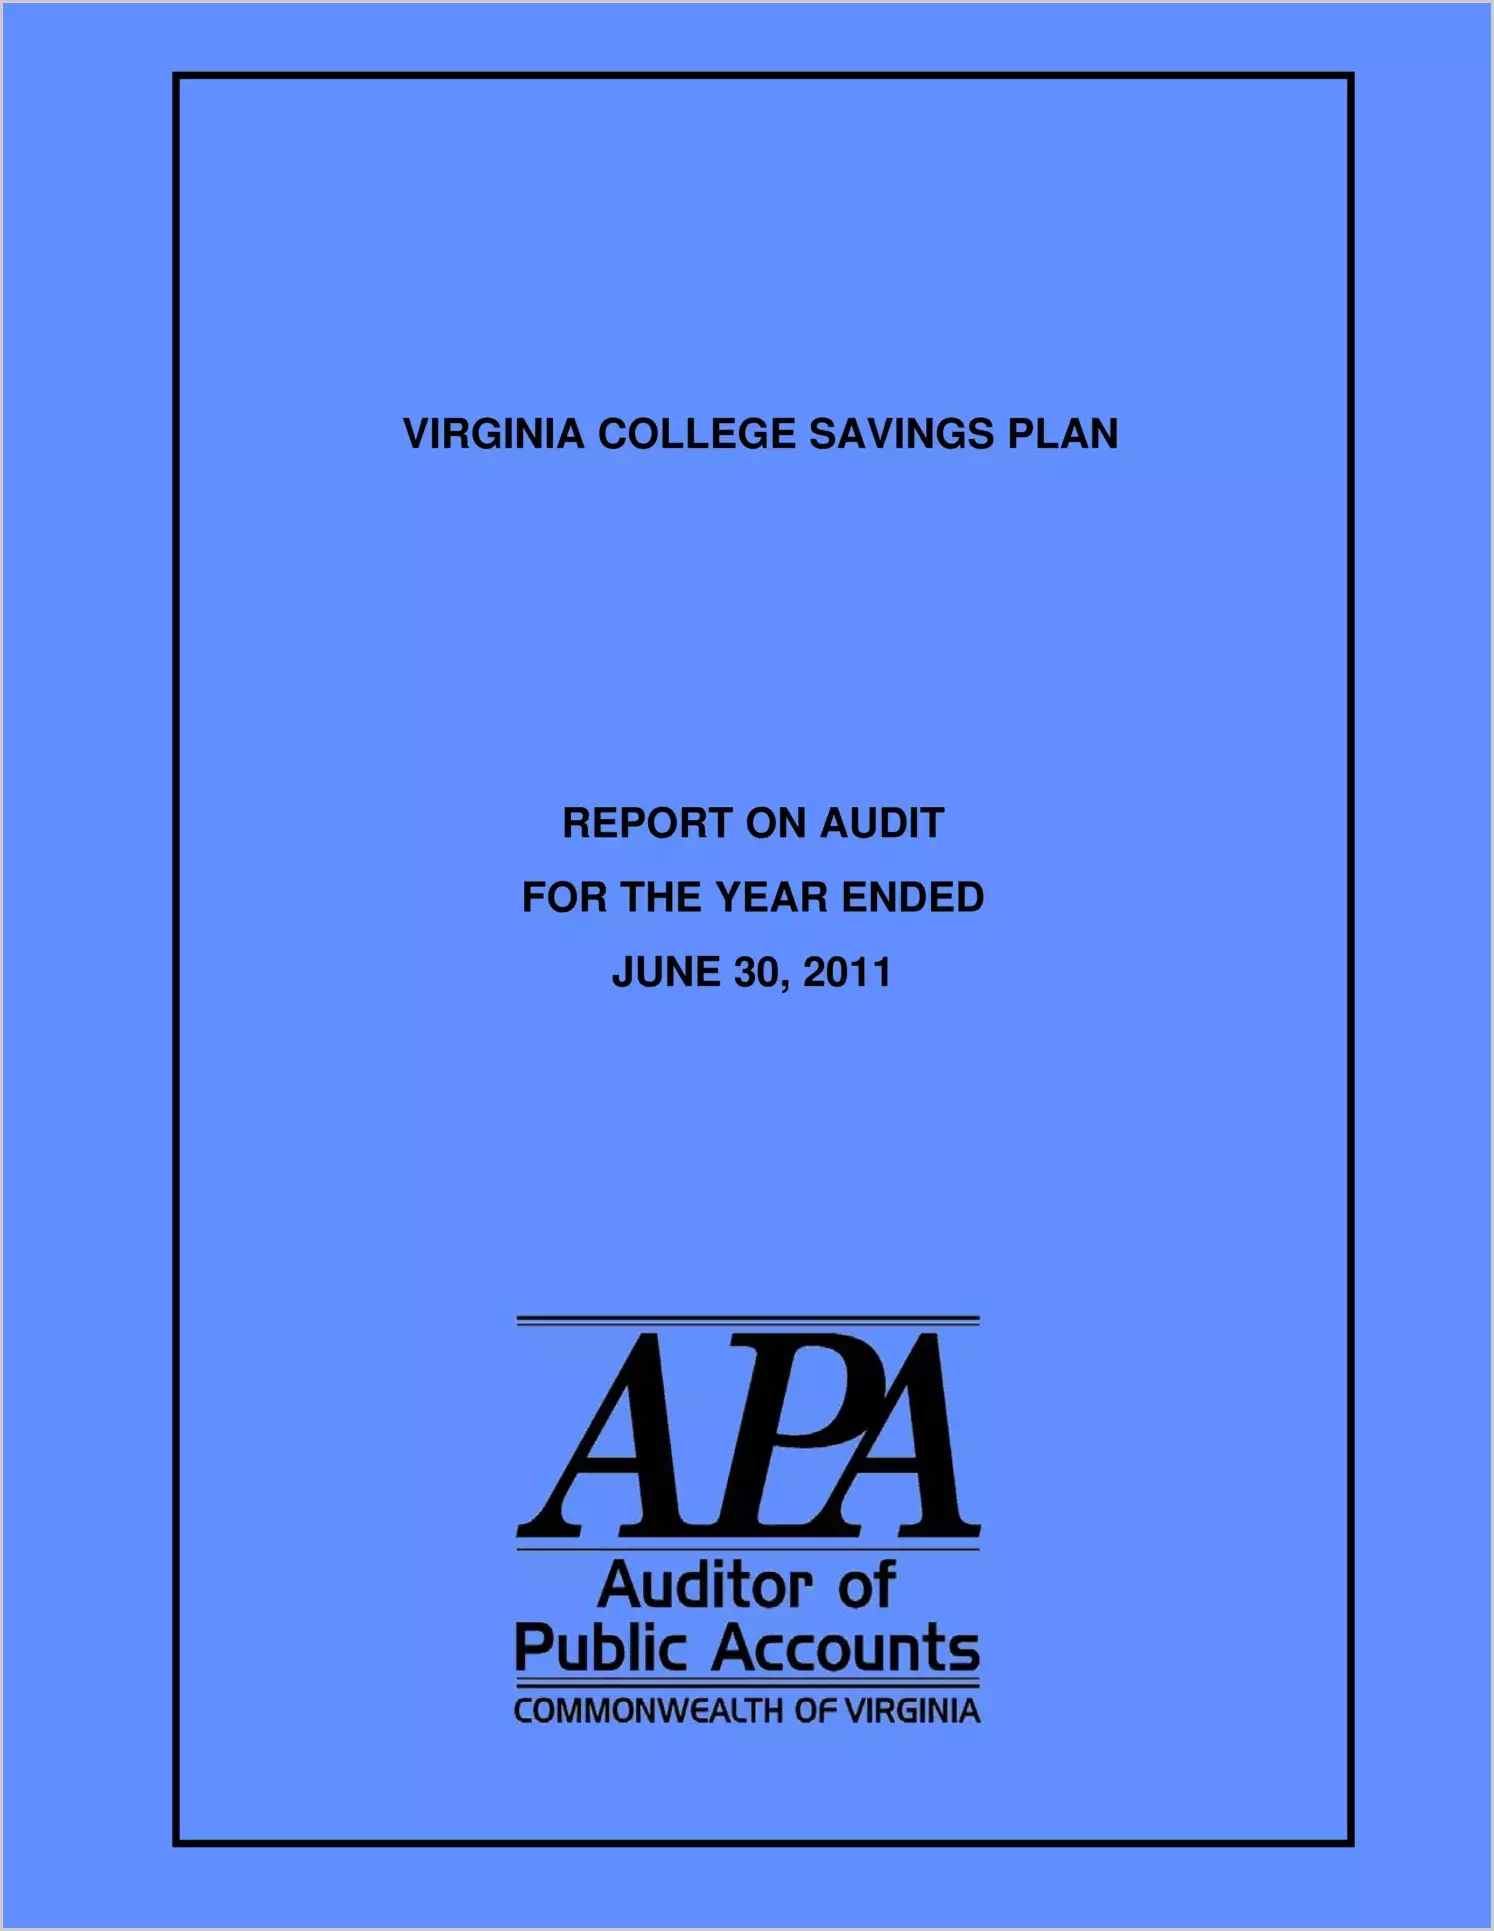 Virginia College Savings Plan for the year ended June 30, 2011